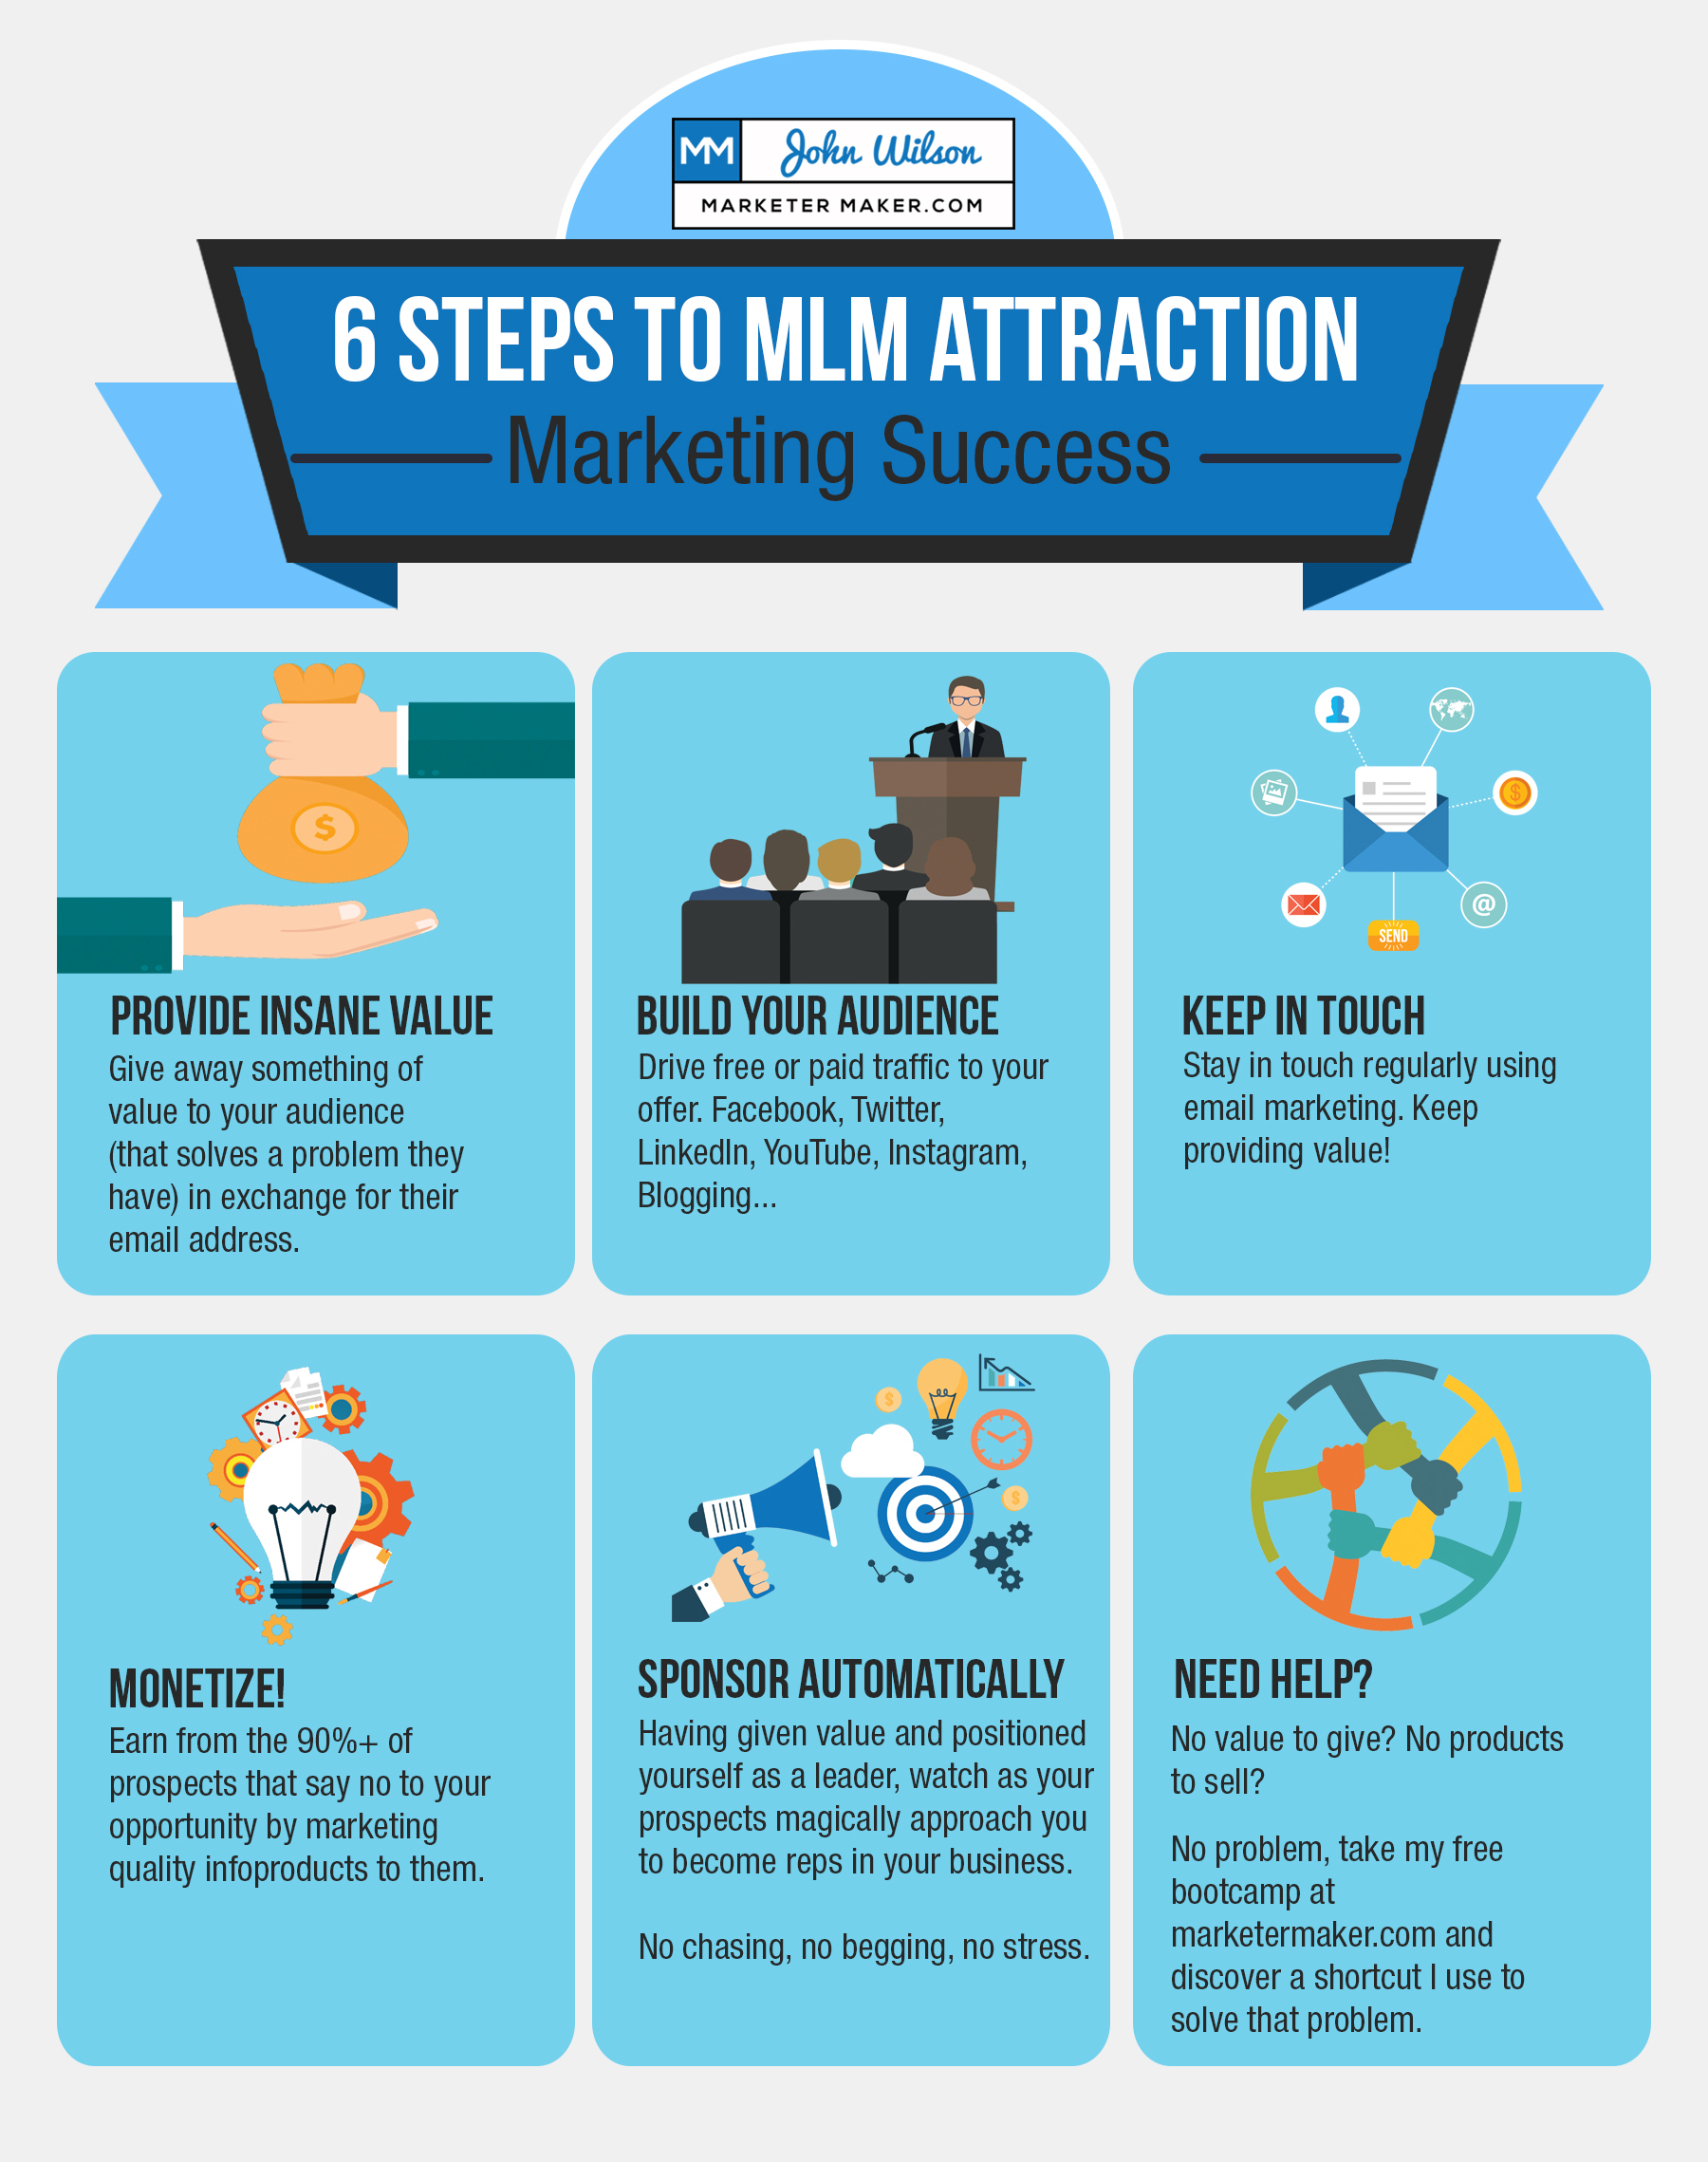 MLM Attraction Marketing Infographic